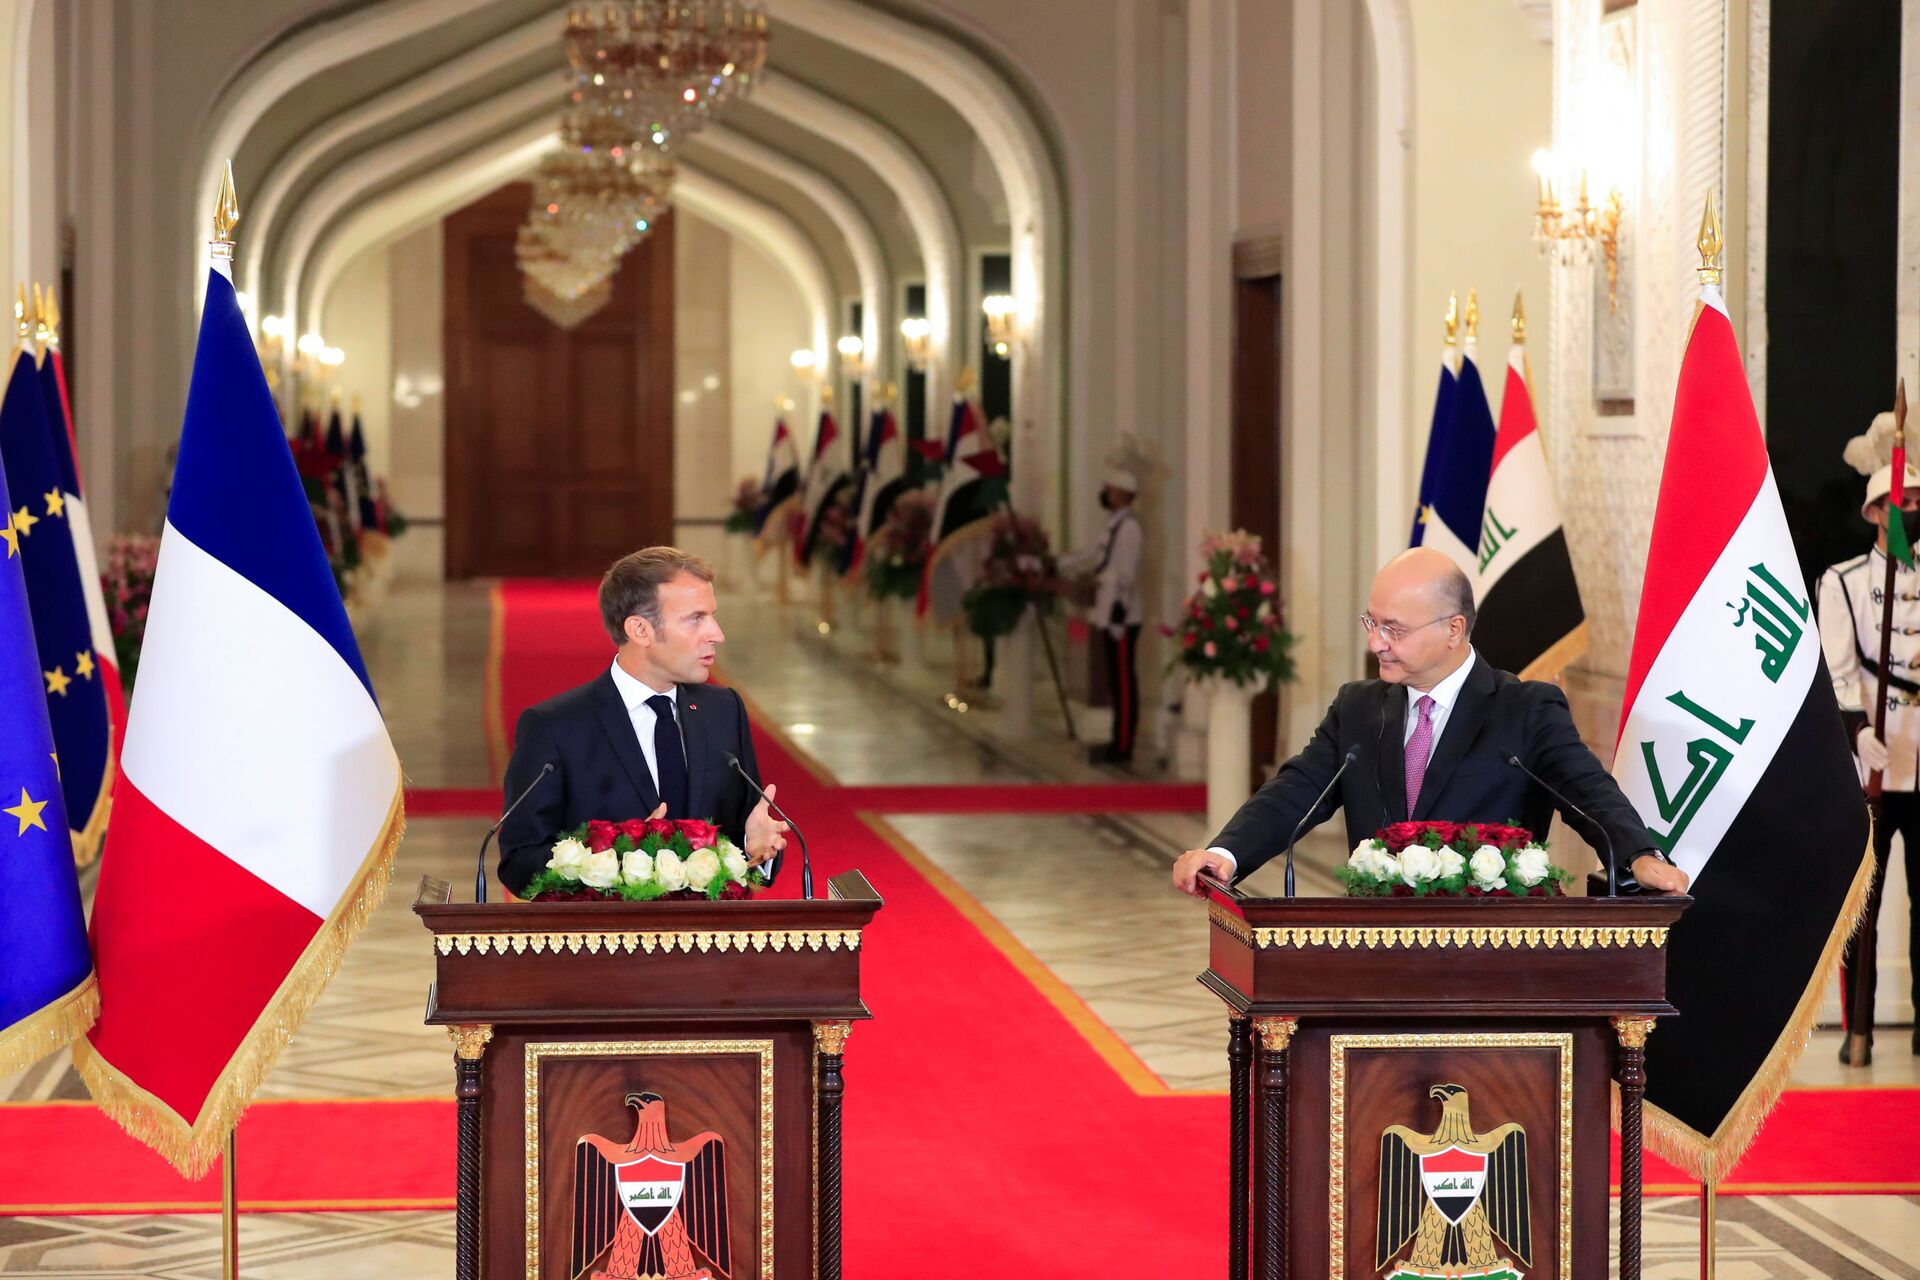 Iraq's President Barham Salih and France's President Emmanuel Macron attend a news conference ahead of the Baghdad summit at the Green Zone in Baghdad, Iraq August 28, 2021 - Sputnik International, 1920, 07.09.2021